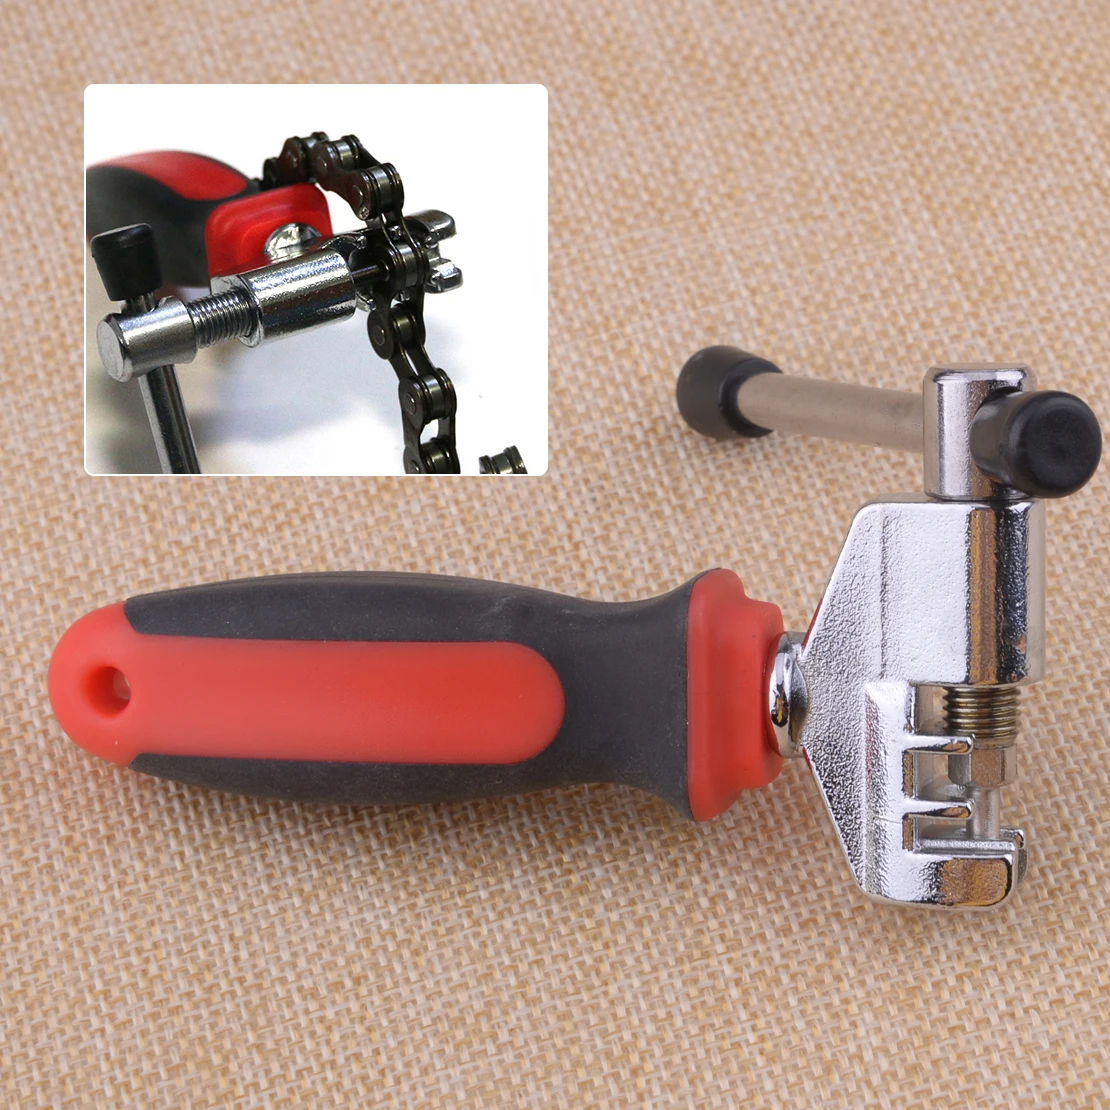 

LETAOSK New Mini Bike Chain Breaker Cutter Splitter Removal Tool Remover Cycle Solid Repair Tools for Bicycle